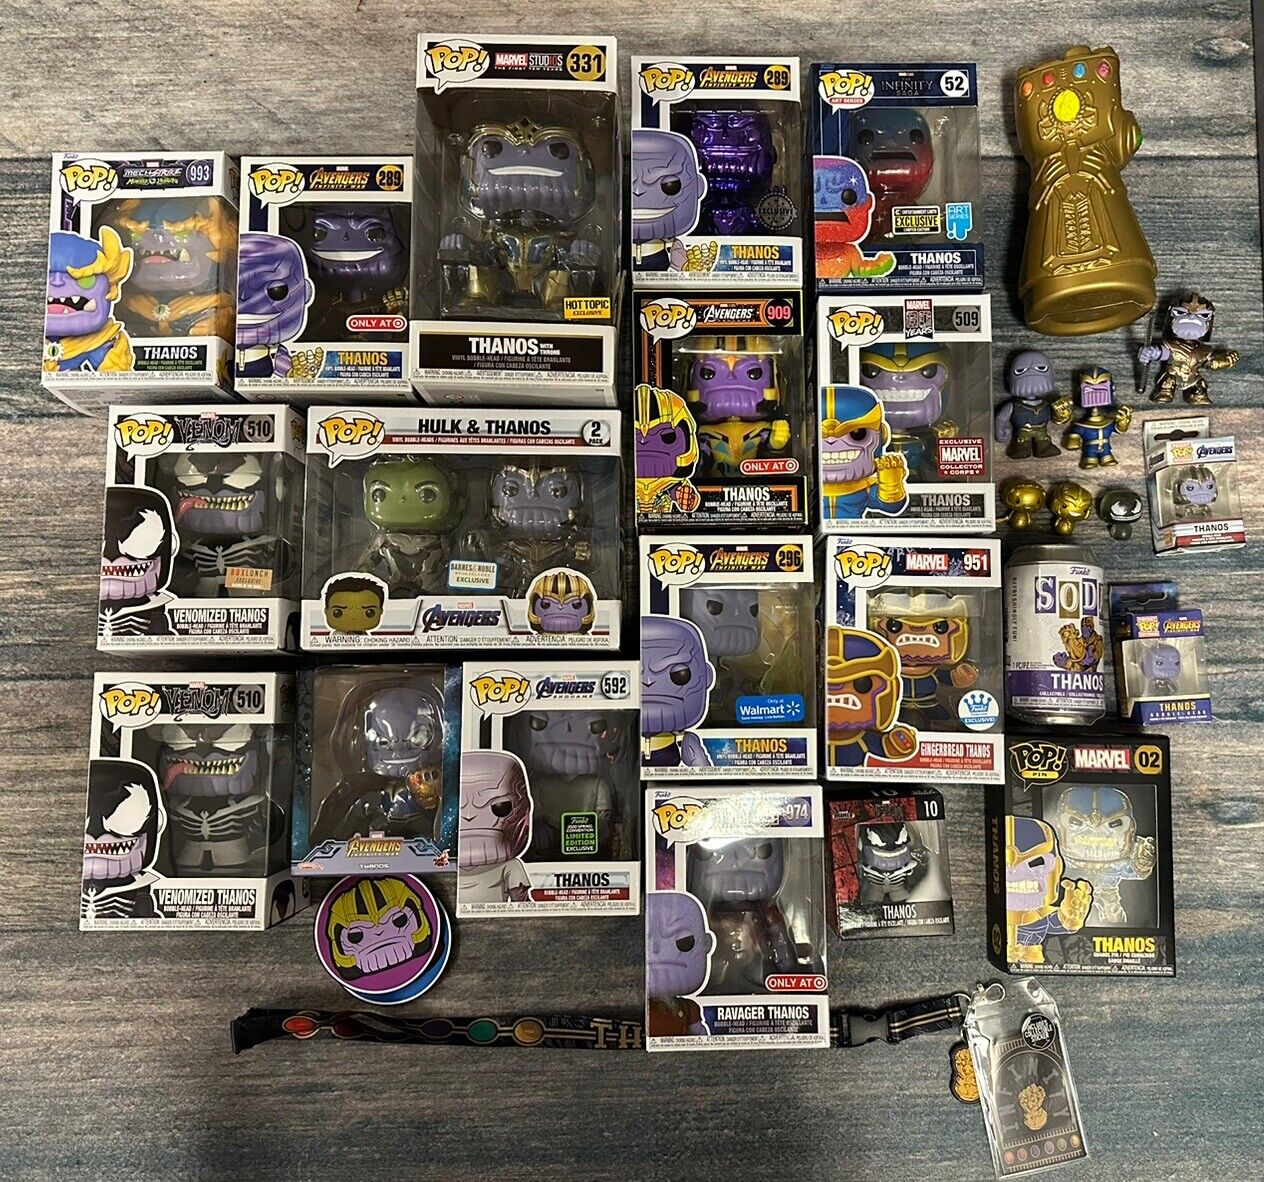 Thanos Funko Pop Figure & Collectibles MASSIVE Lot Over 25 Items Exclusive Set